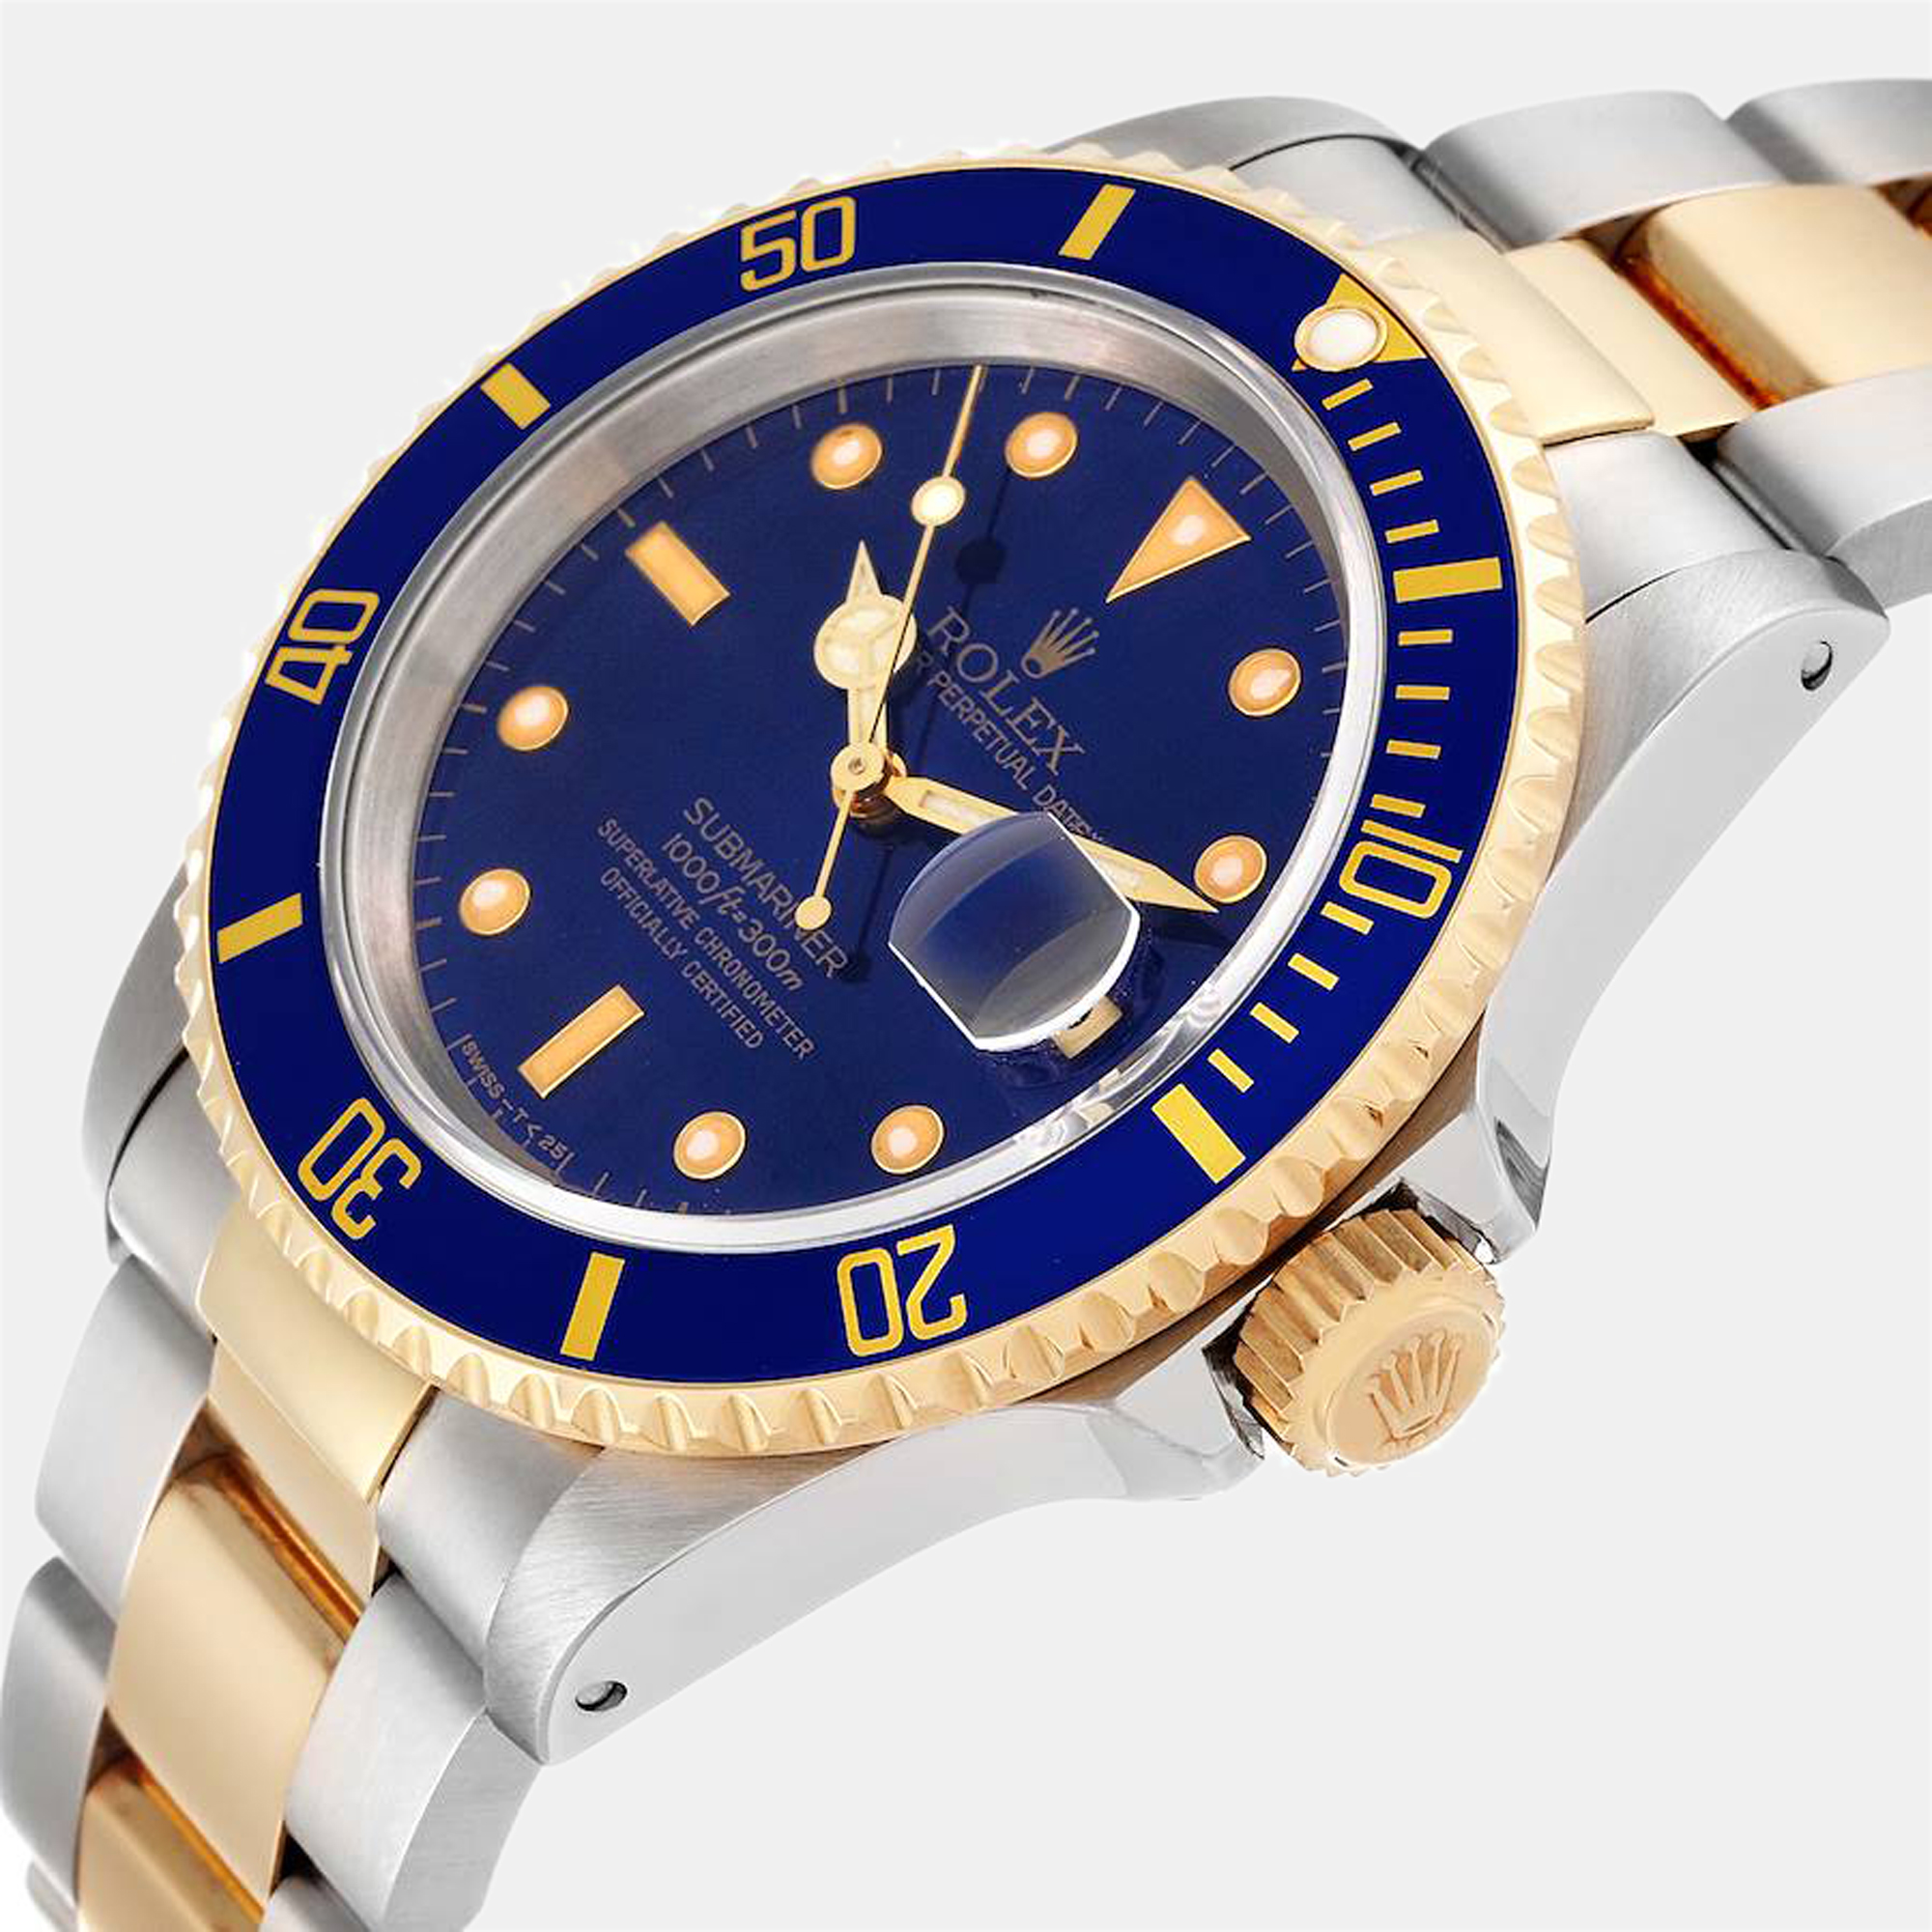 

Rolex Blue 18k Yellow Gold And Stainless Steel Submariner 16613 Automatic Men's Wristwatch 40 mm